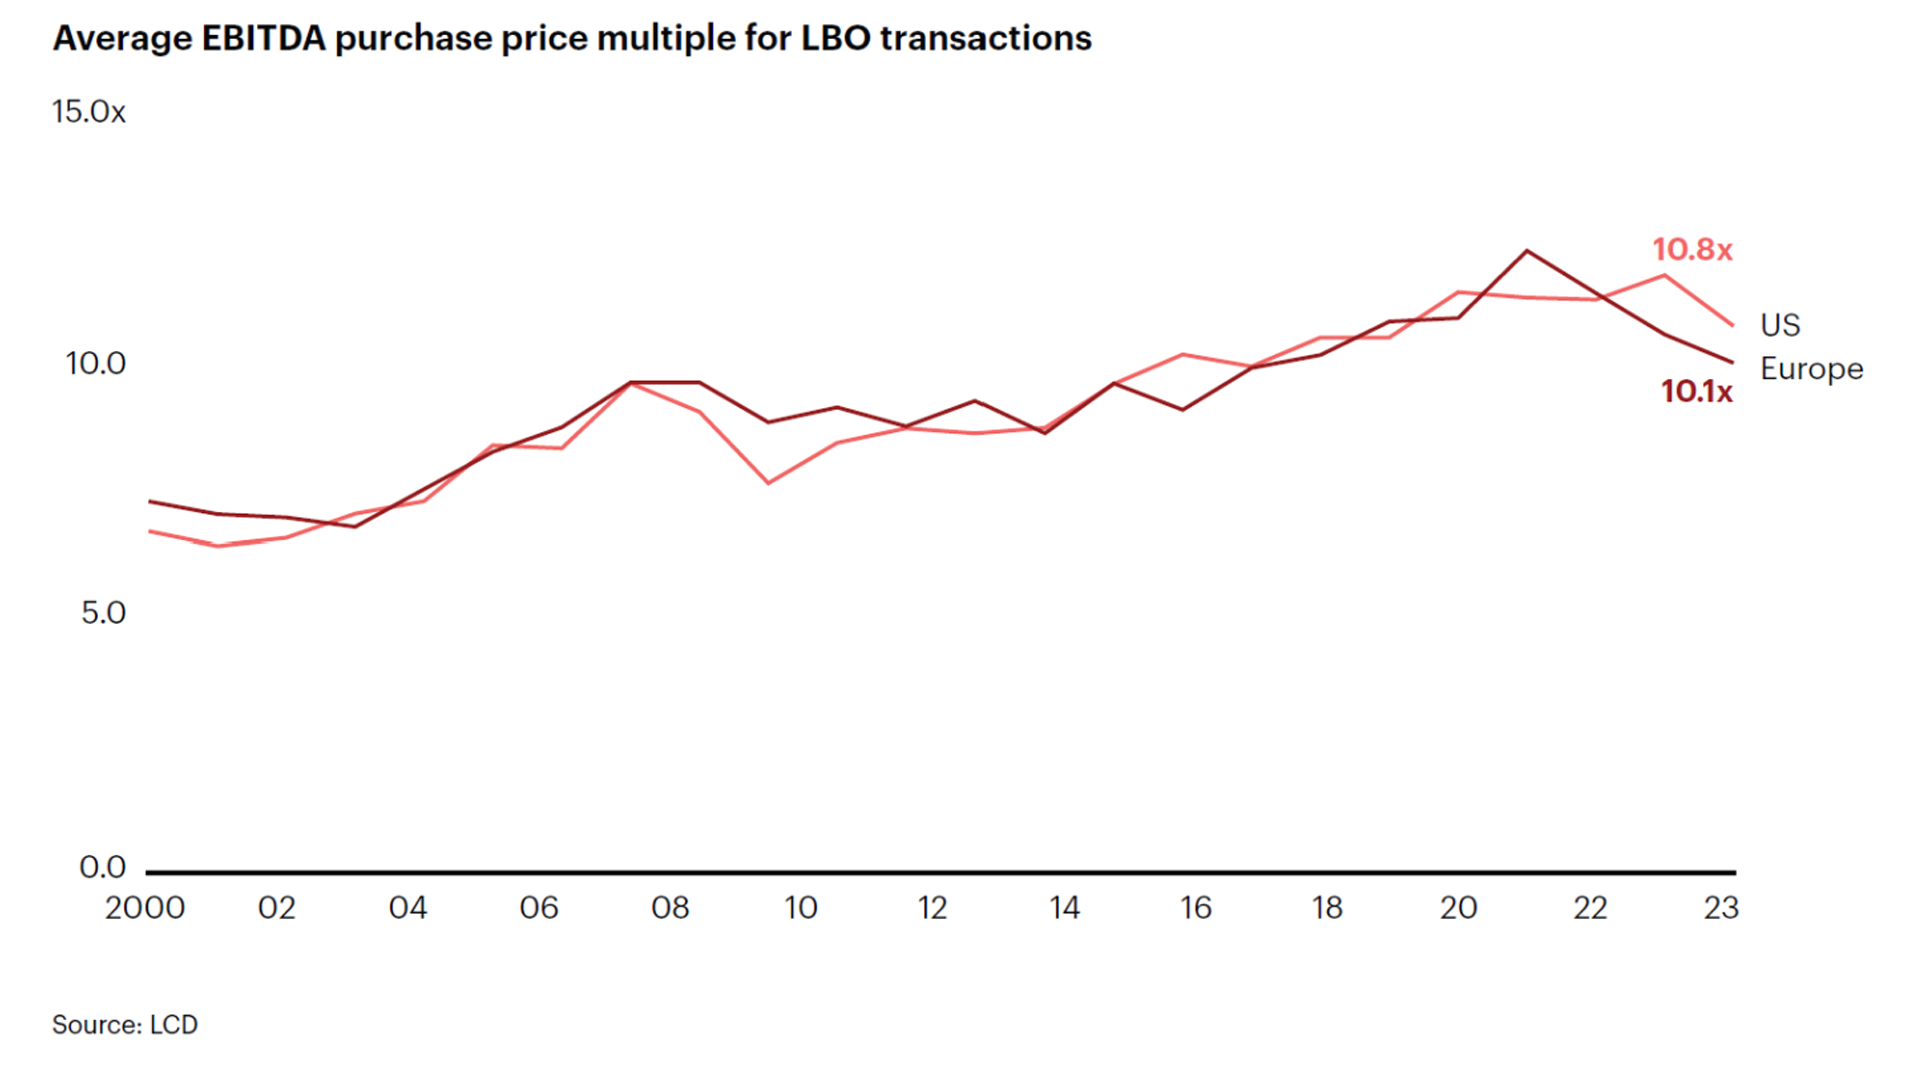 Average EBITDA purchase price multiple for LBO transactions